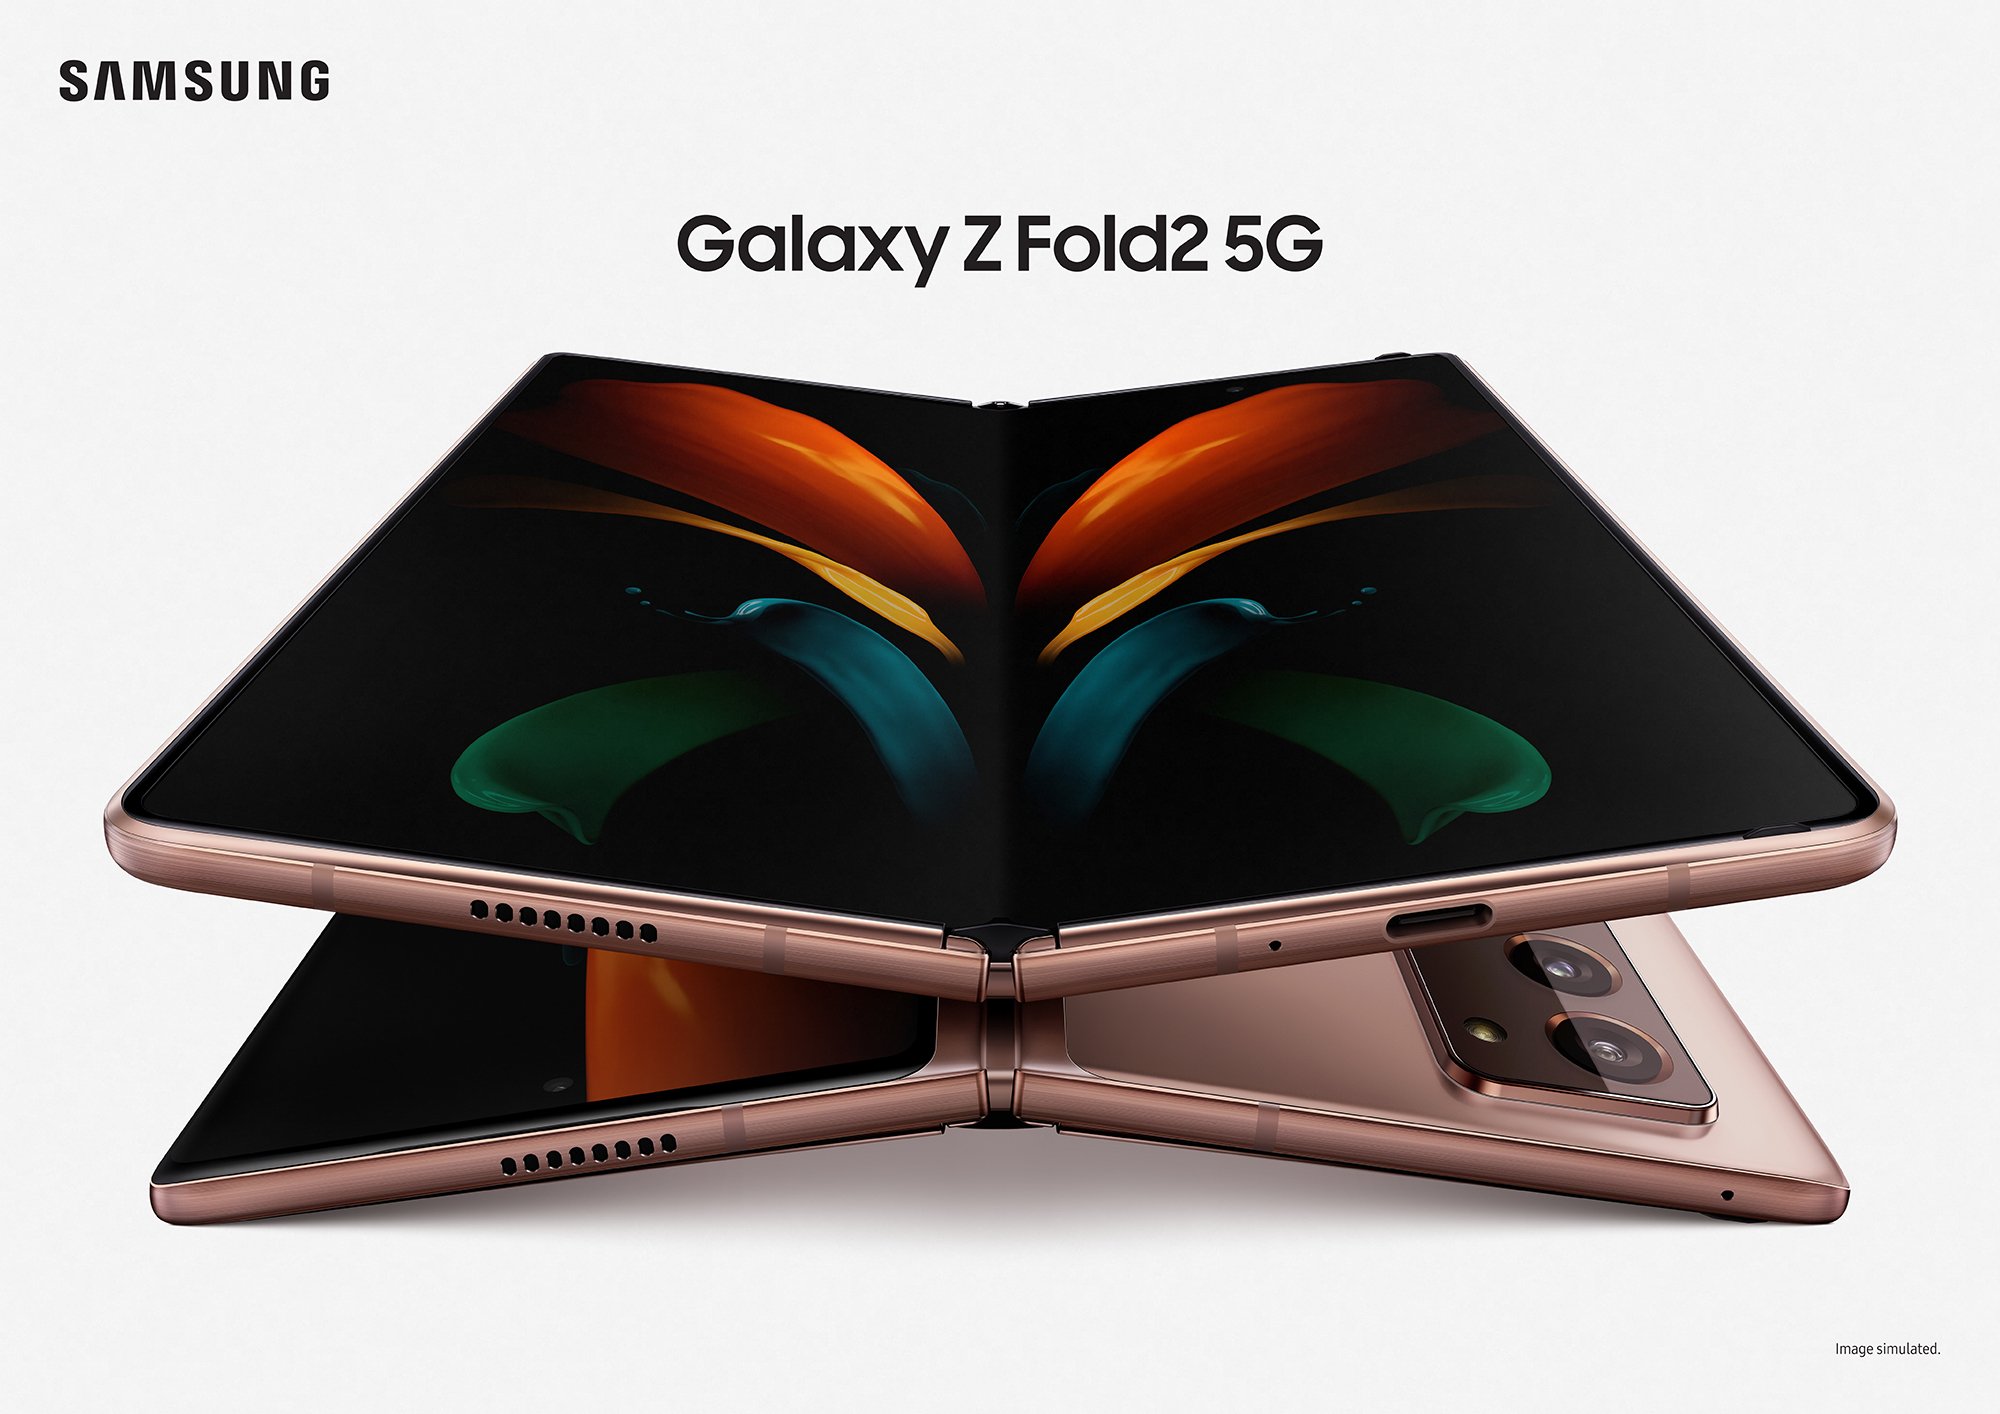 Samsung Galaxy Z Fold 3 with under-display camera likely to offer full screen experience